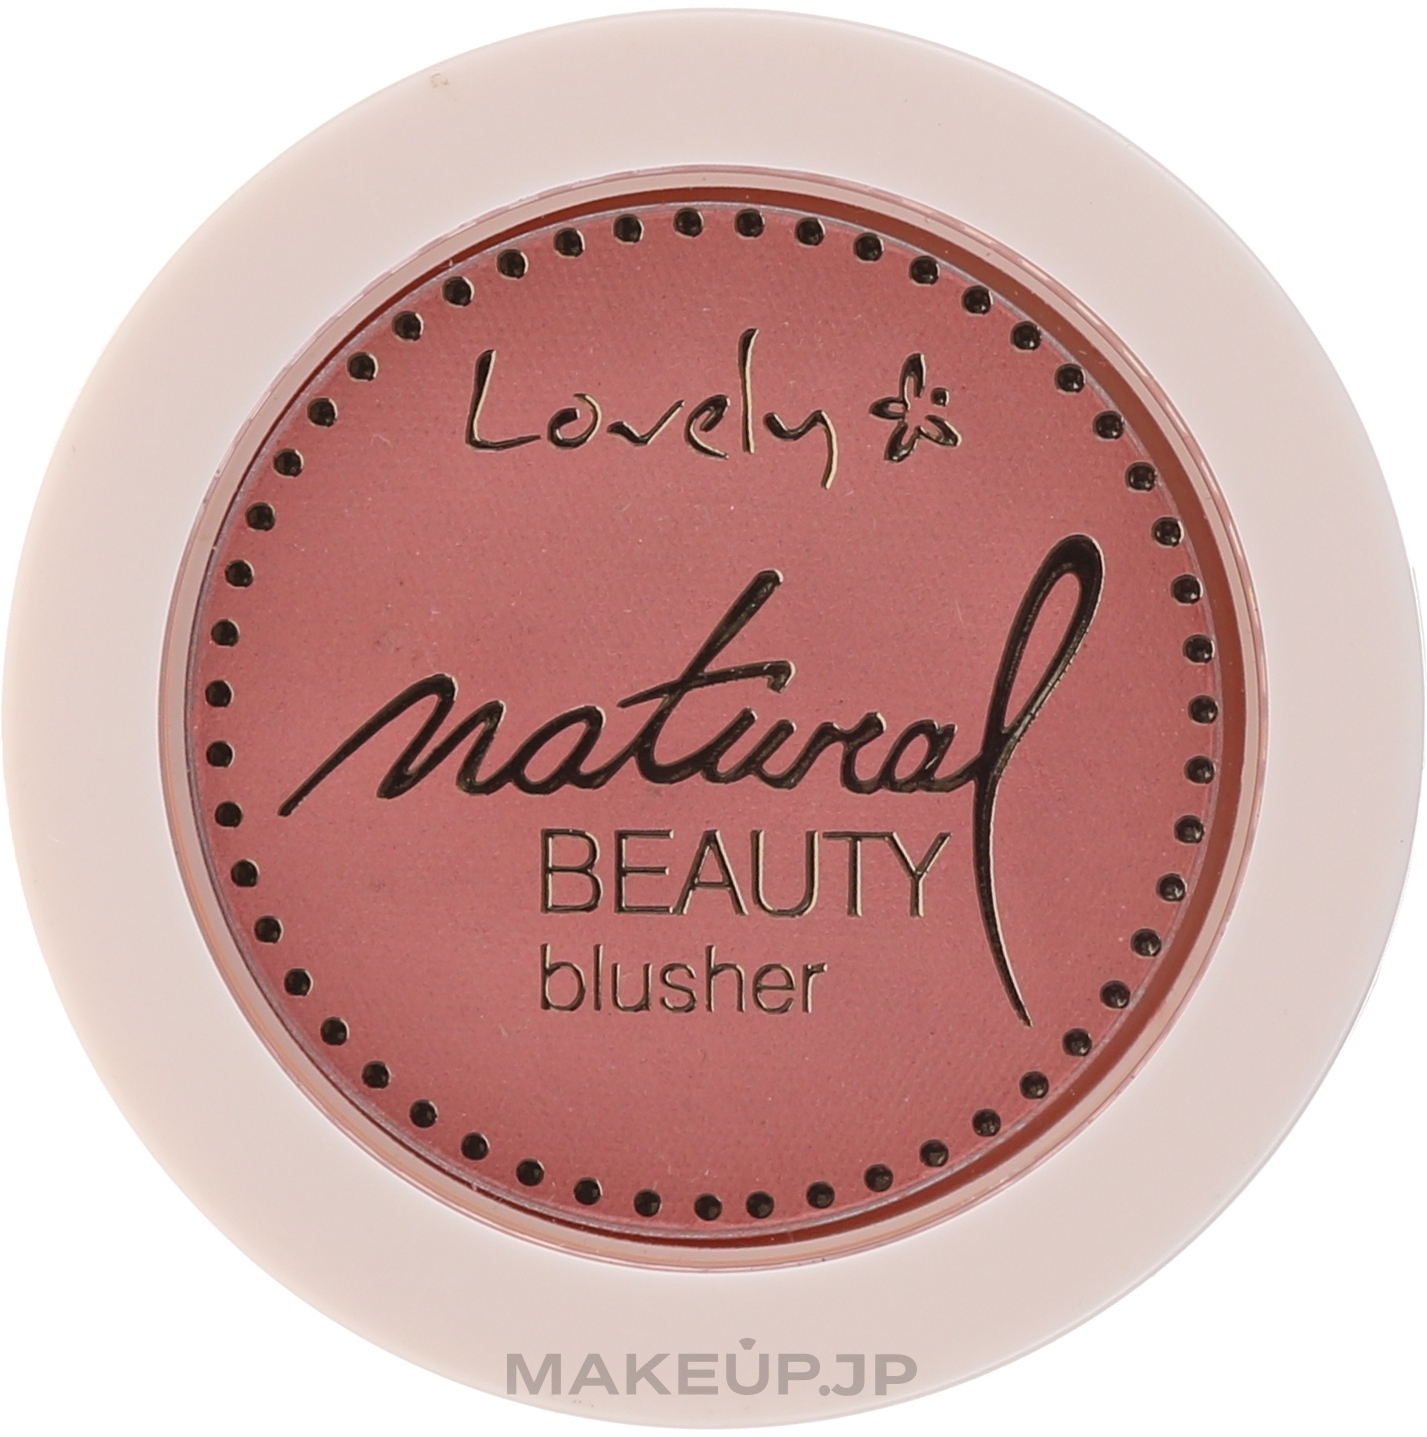 Face Compact Blush - Lovely Natural Beauty Blusher — photo 03